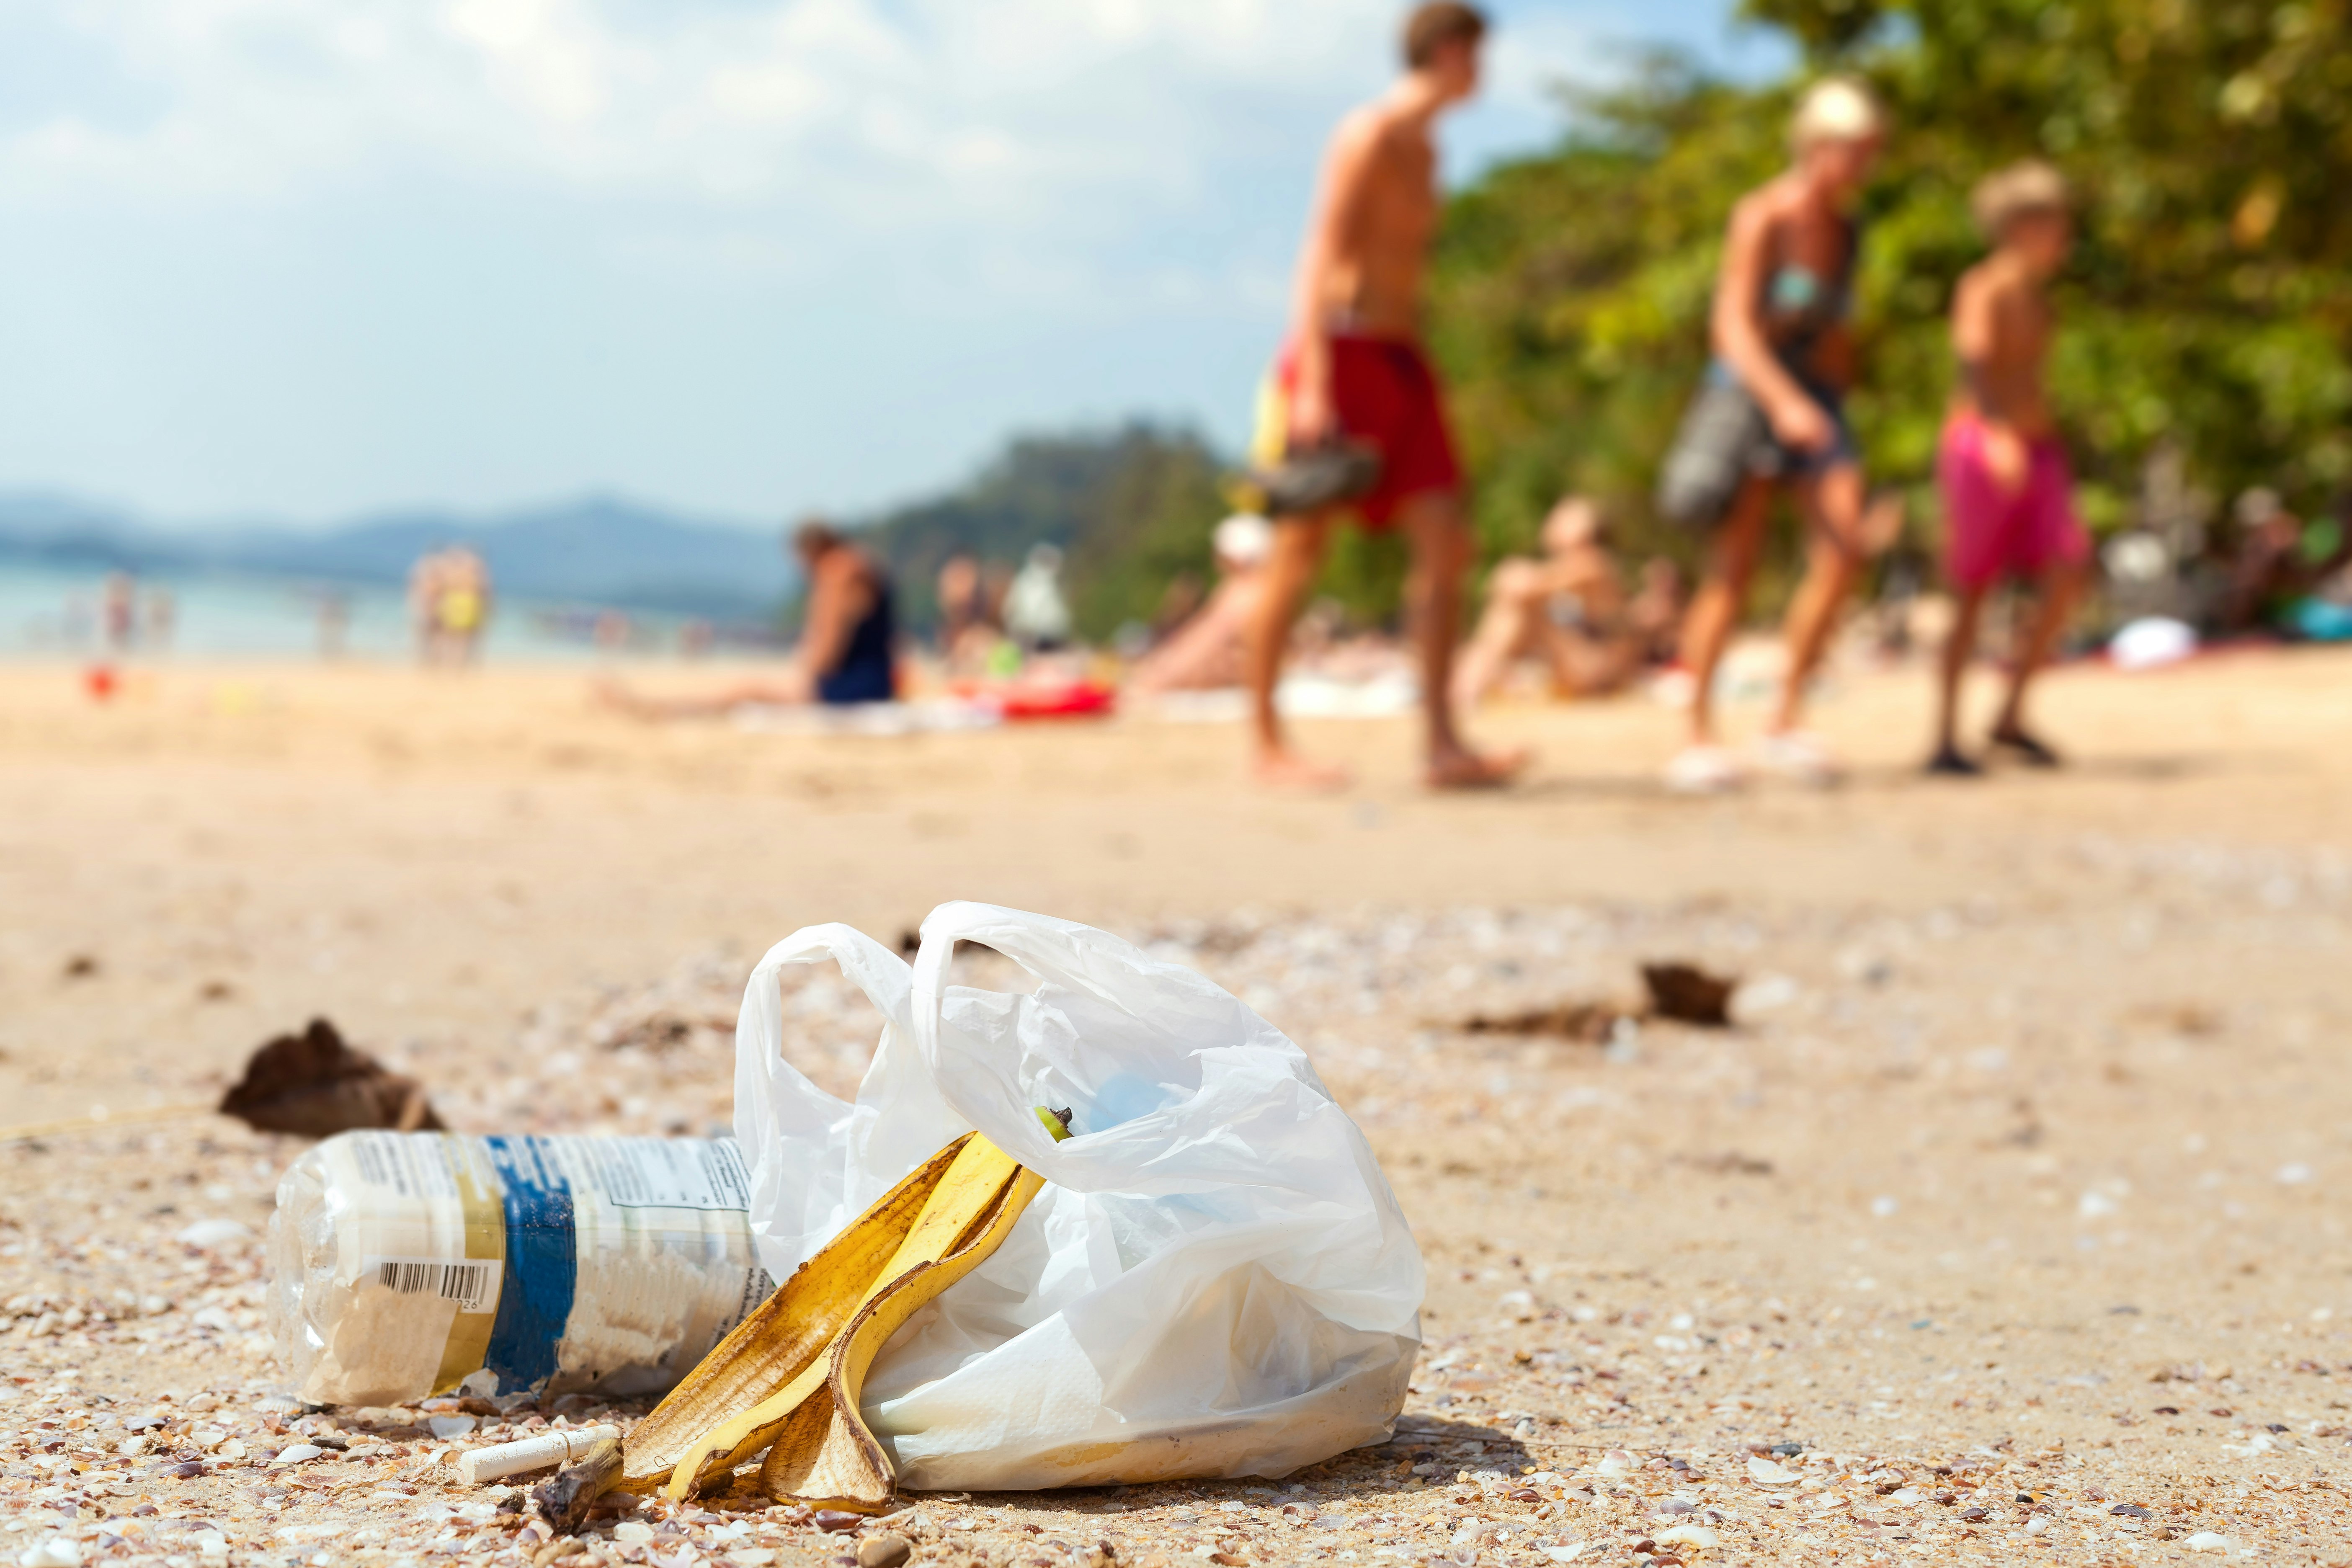 Plastic waste damages the aesthetic value of tourist destinations